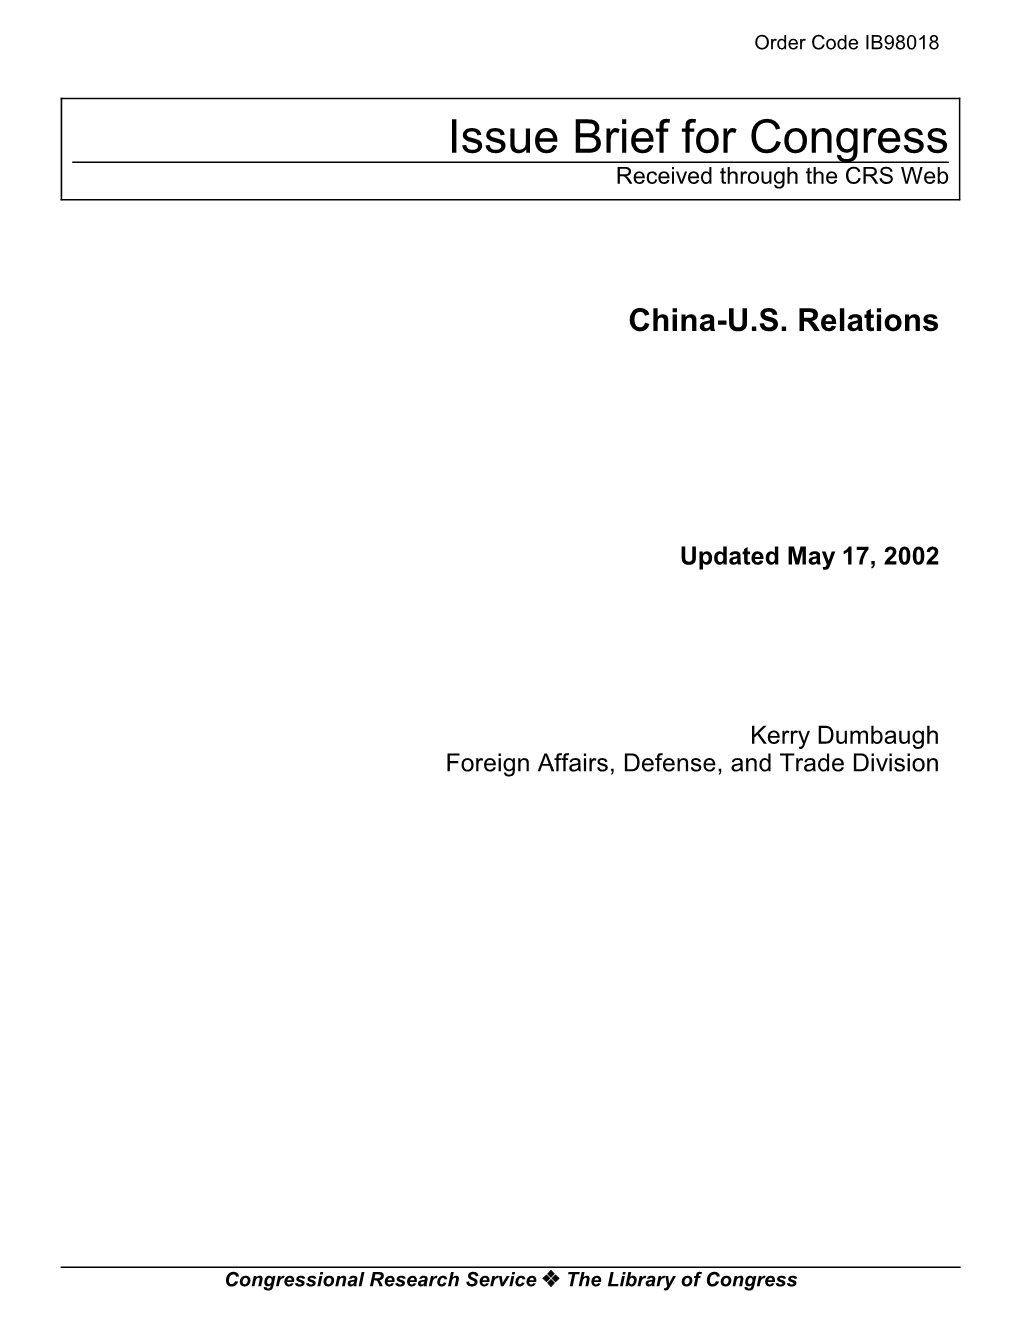 China-US Relations